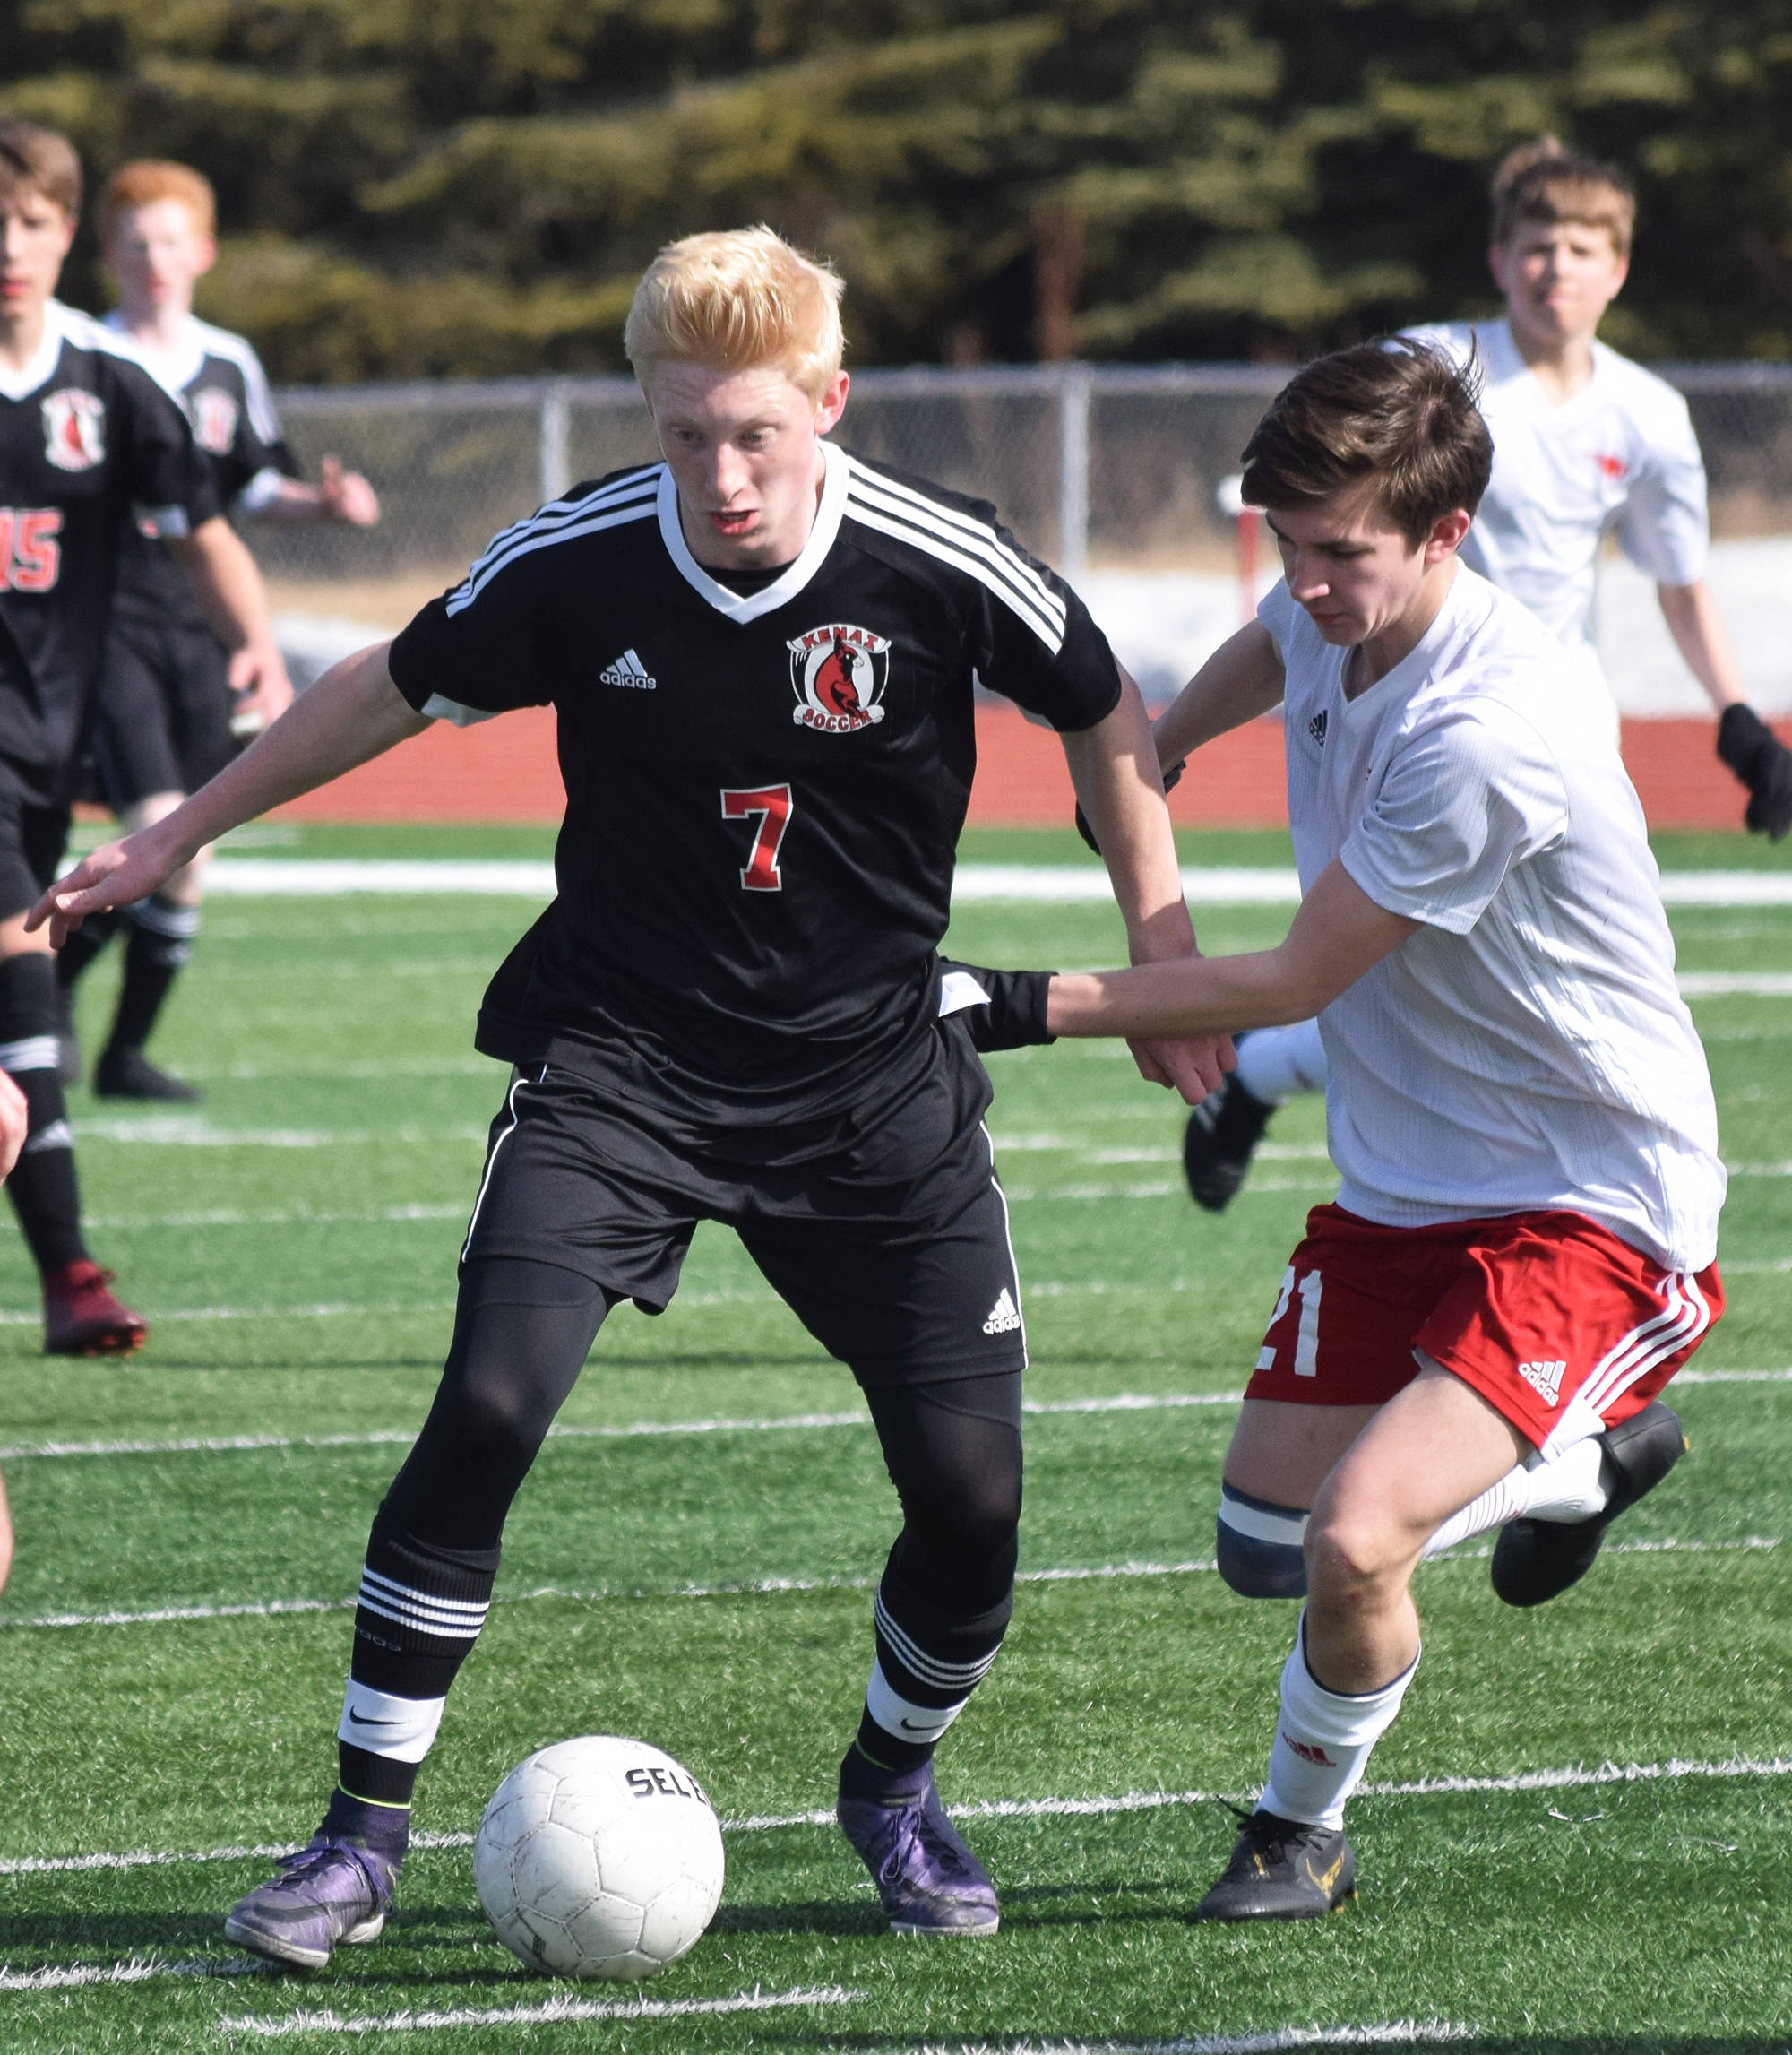 Kenai’s Leif Lofquist looks for a move around North Pole’s Anthony Iles Saturday, April 13, 2019, in a nonconference game at Kenai Central High School. (Photo by Joey Klecka/Peninsula Clarion)